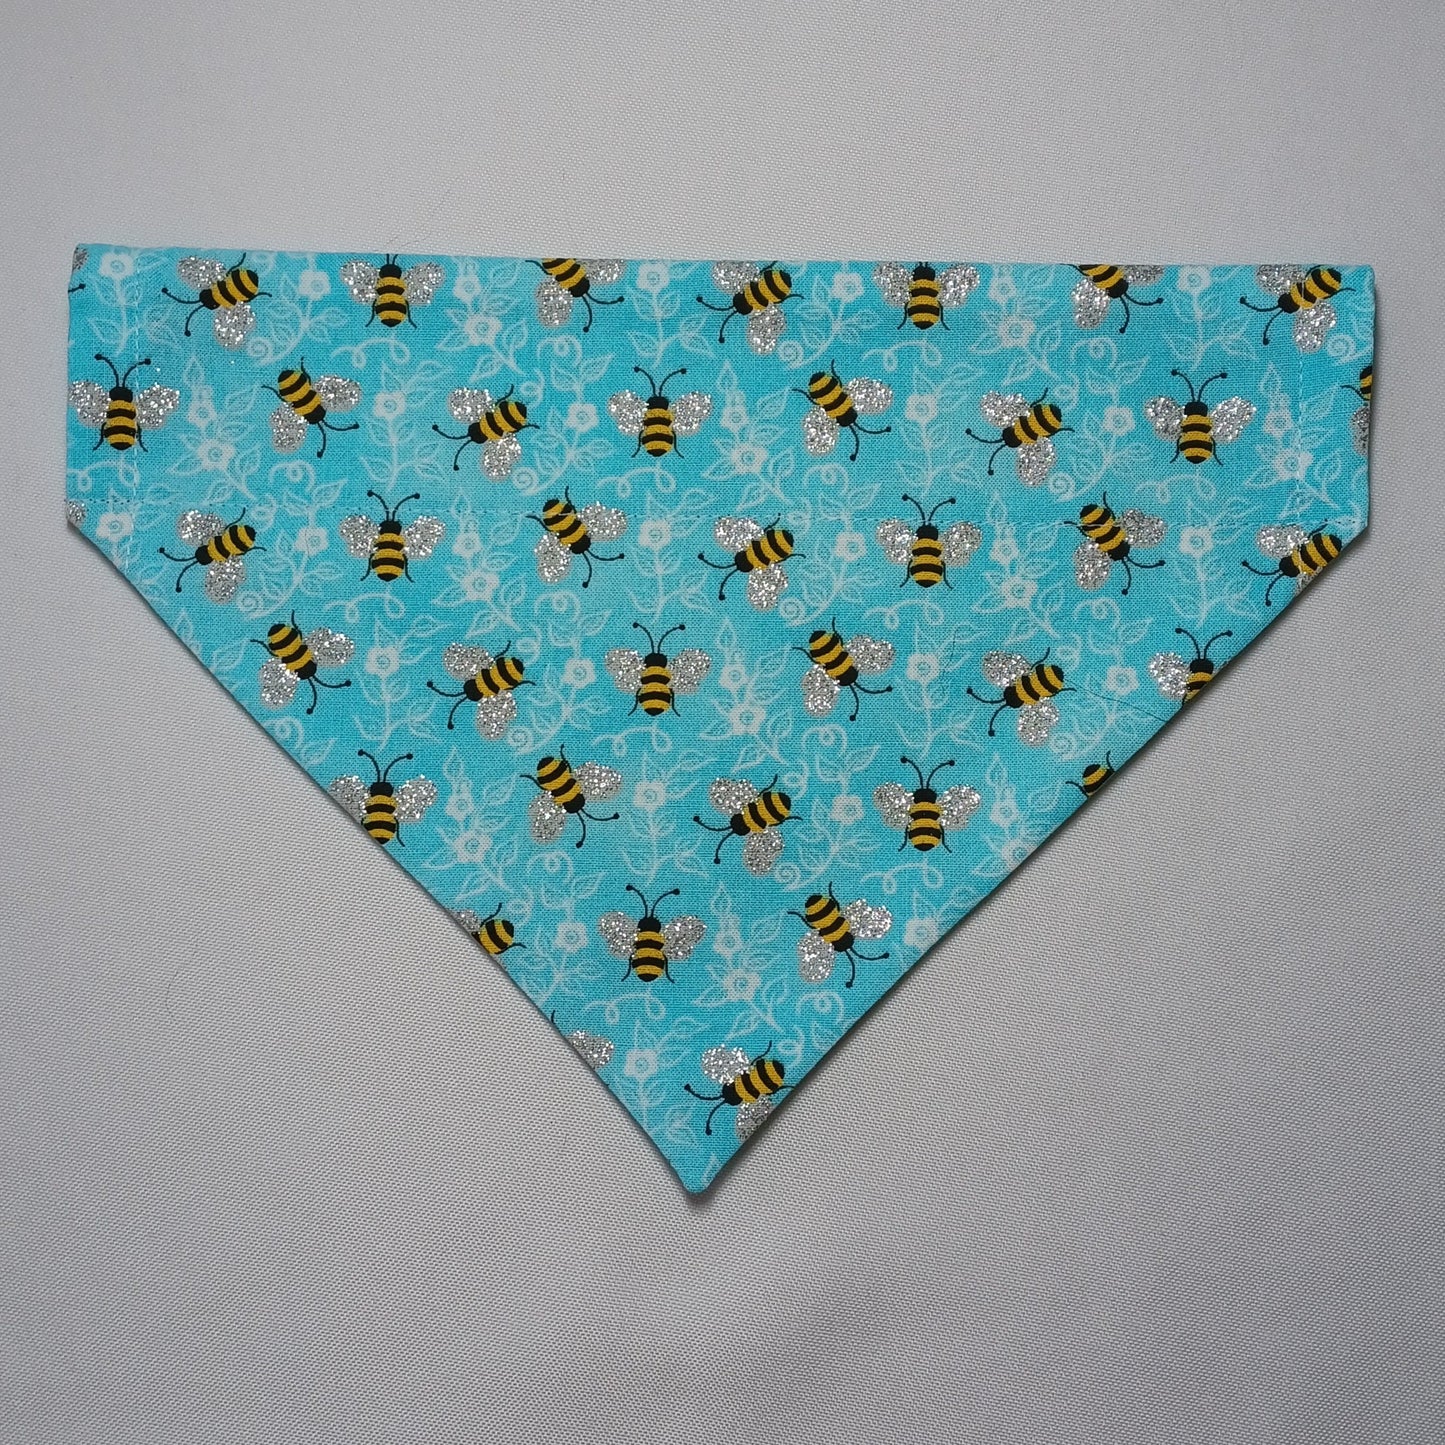 Bees on Light Blue / Teal with Mini White Polka Dots Over-the-Collar Pet Bandana